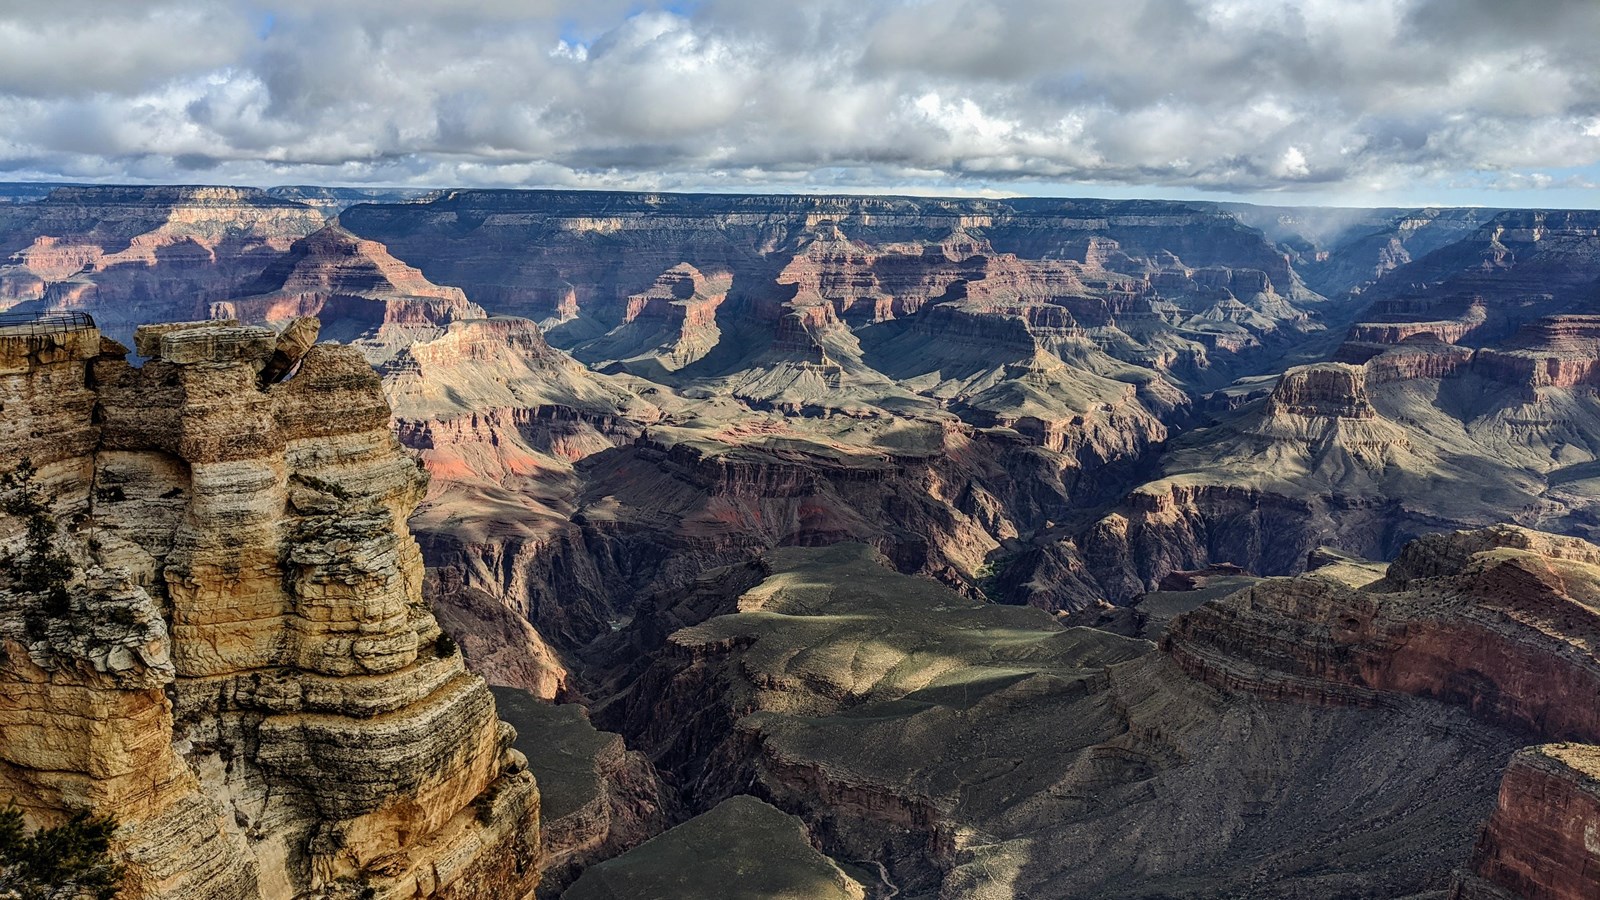 A cliff of yellow rock extends into a view of Grand Canyon\'s colorful landscape with clouds overhead